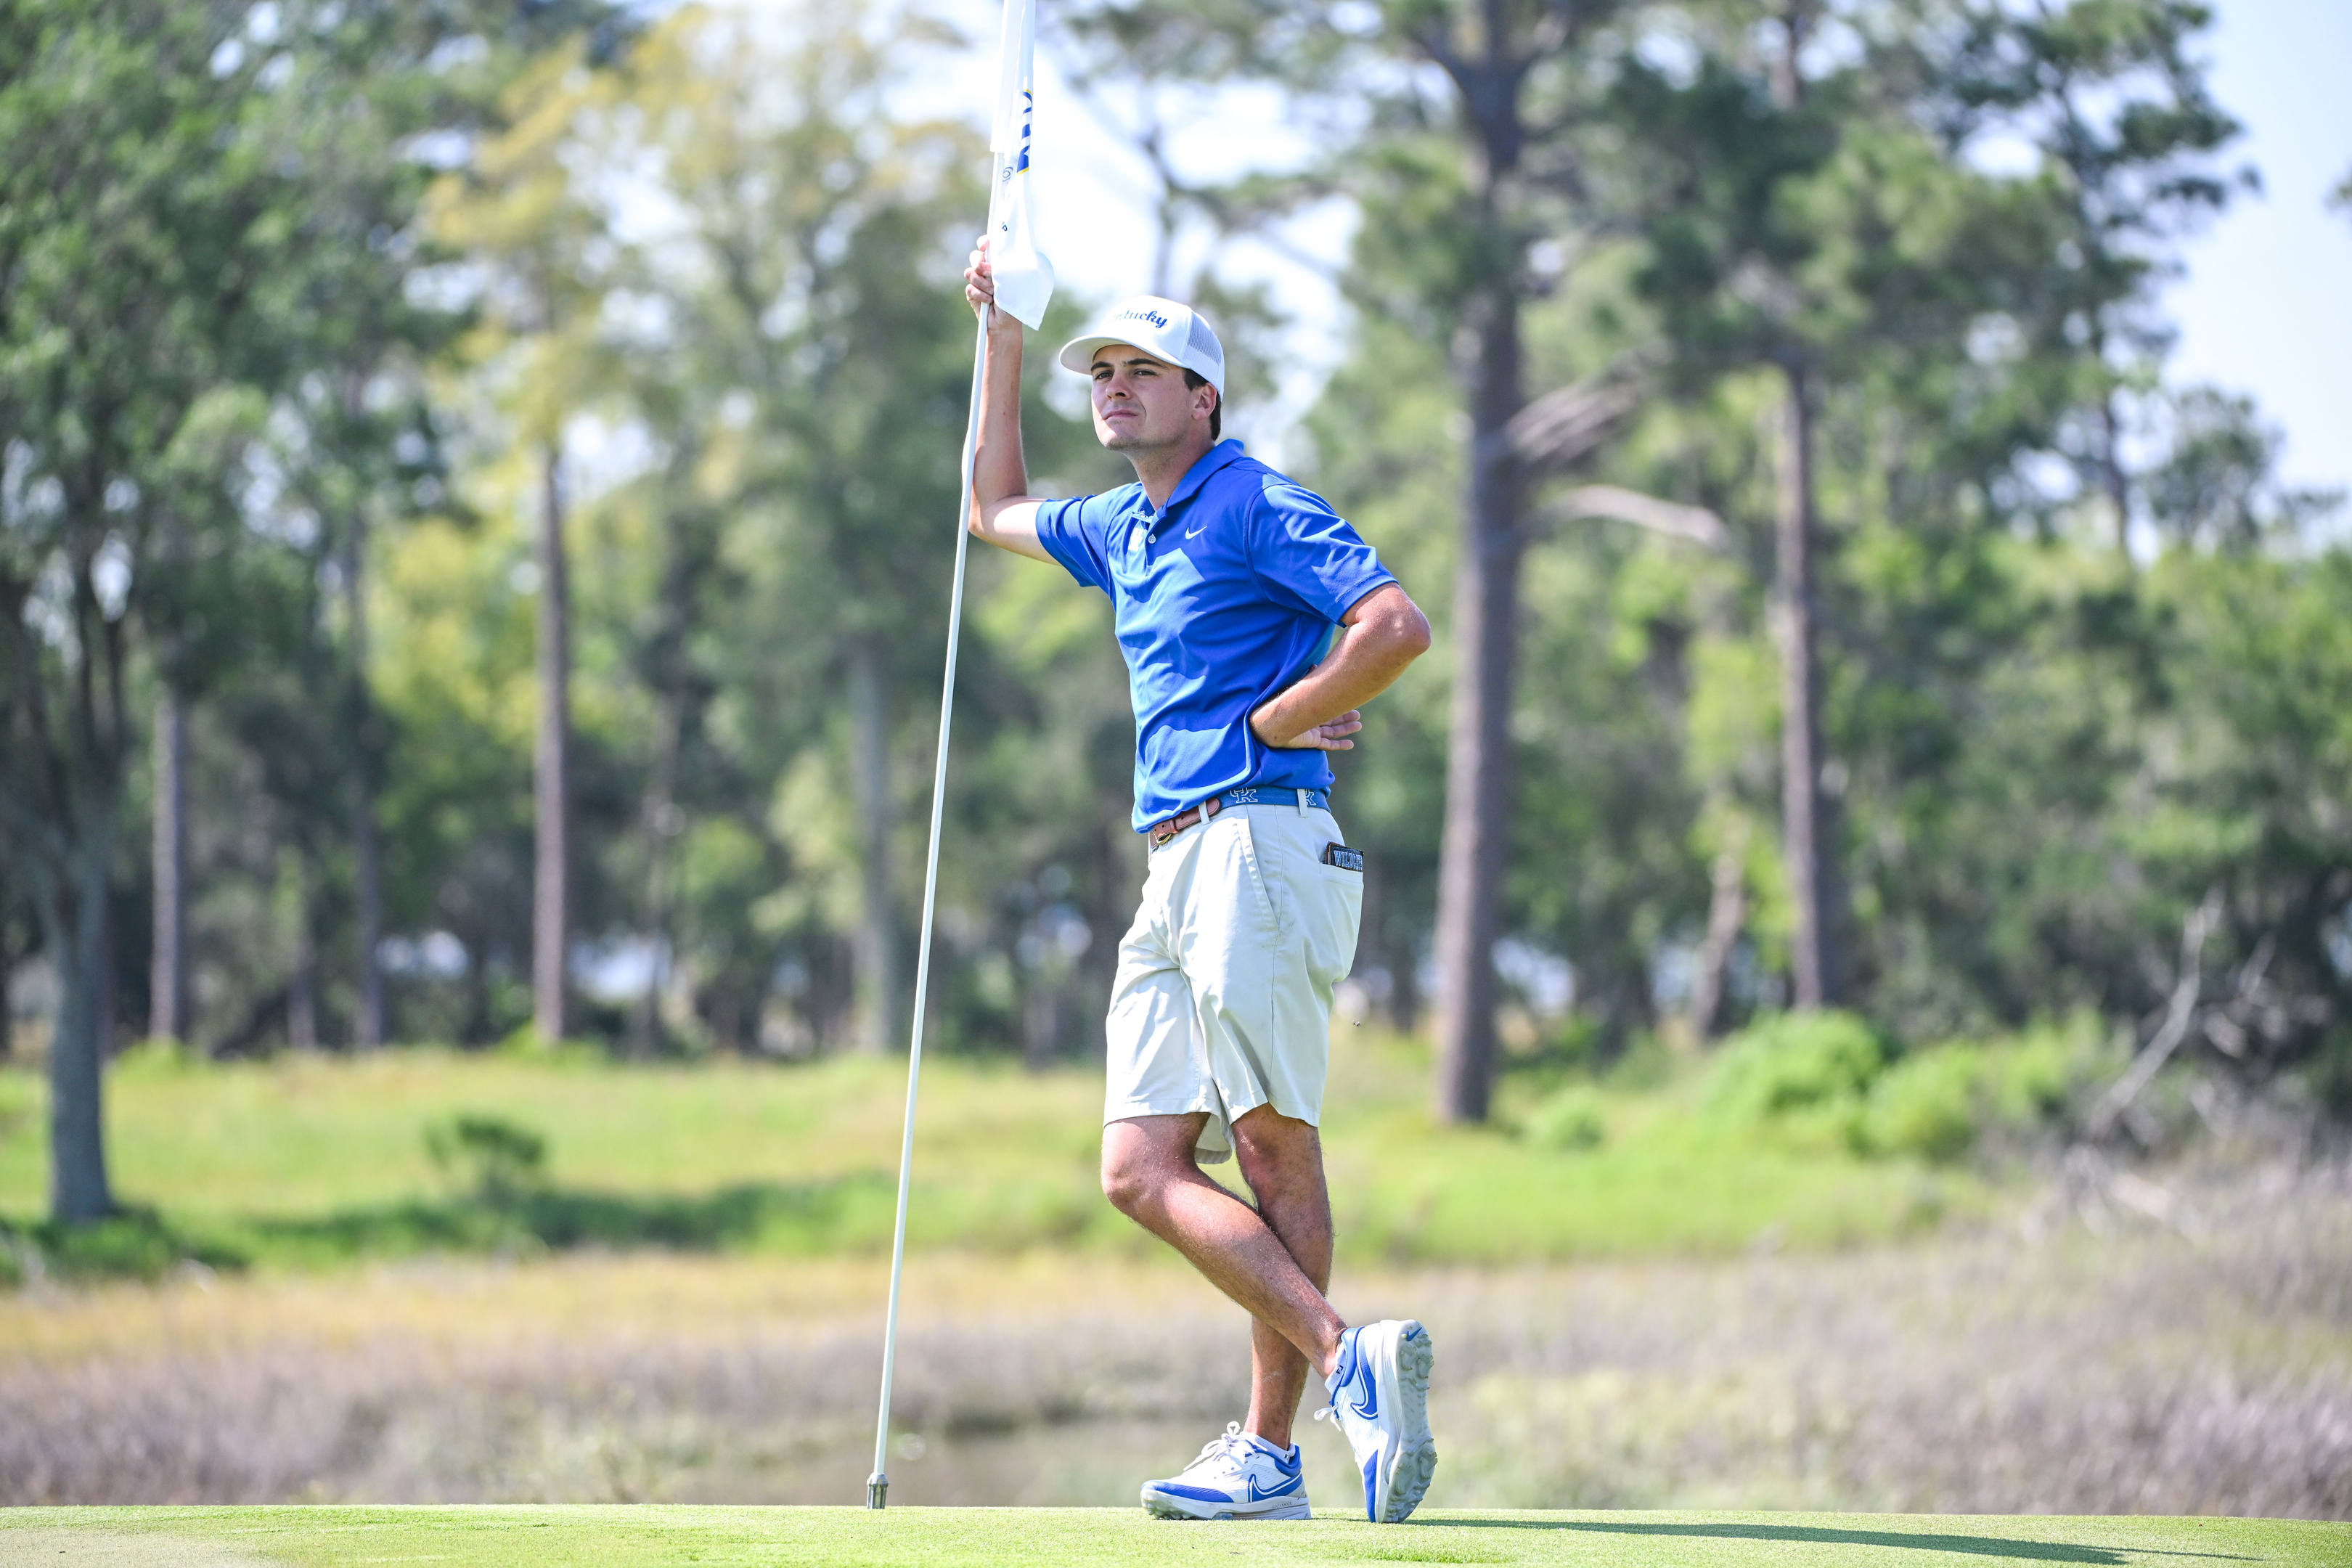 Alex Goff Tees Off in Baton Rouge Regional Monday